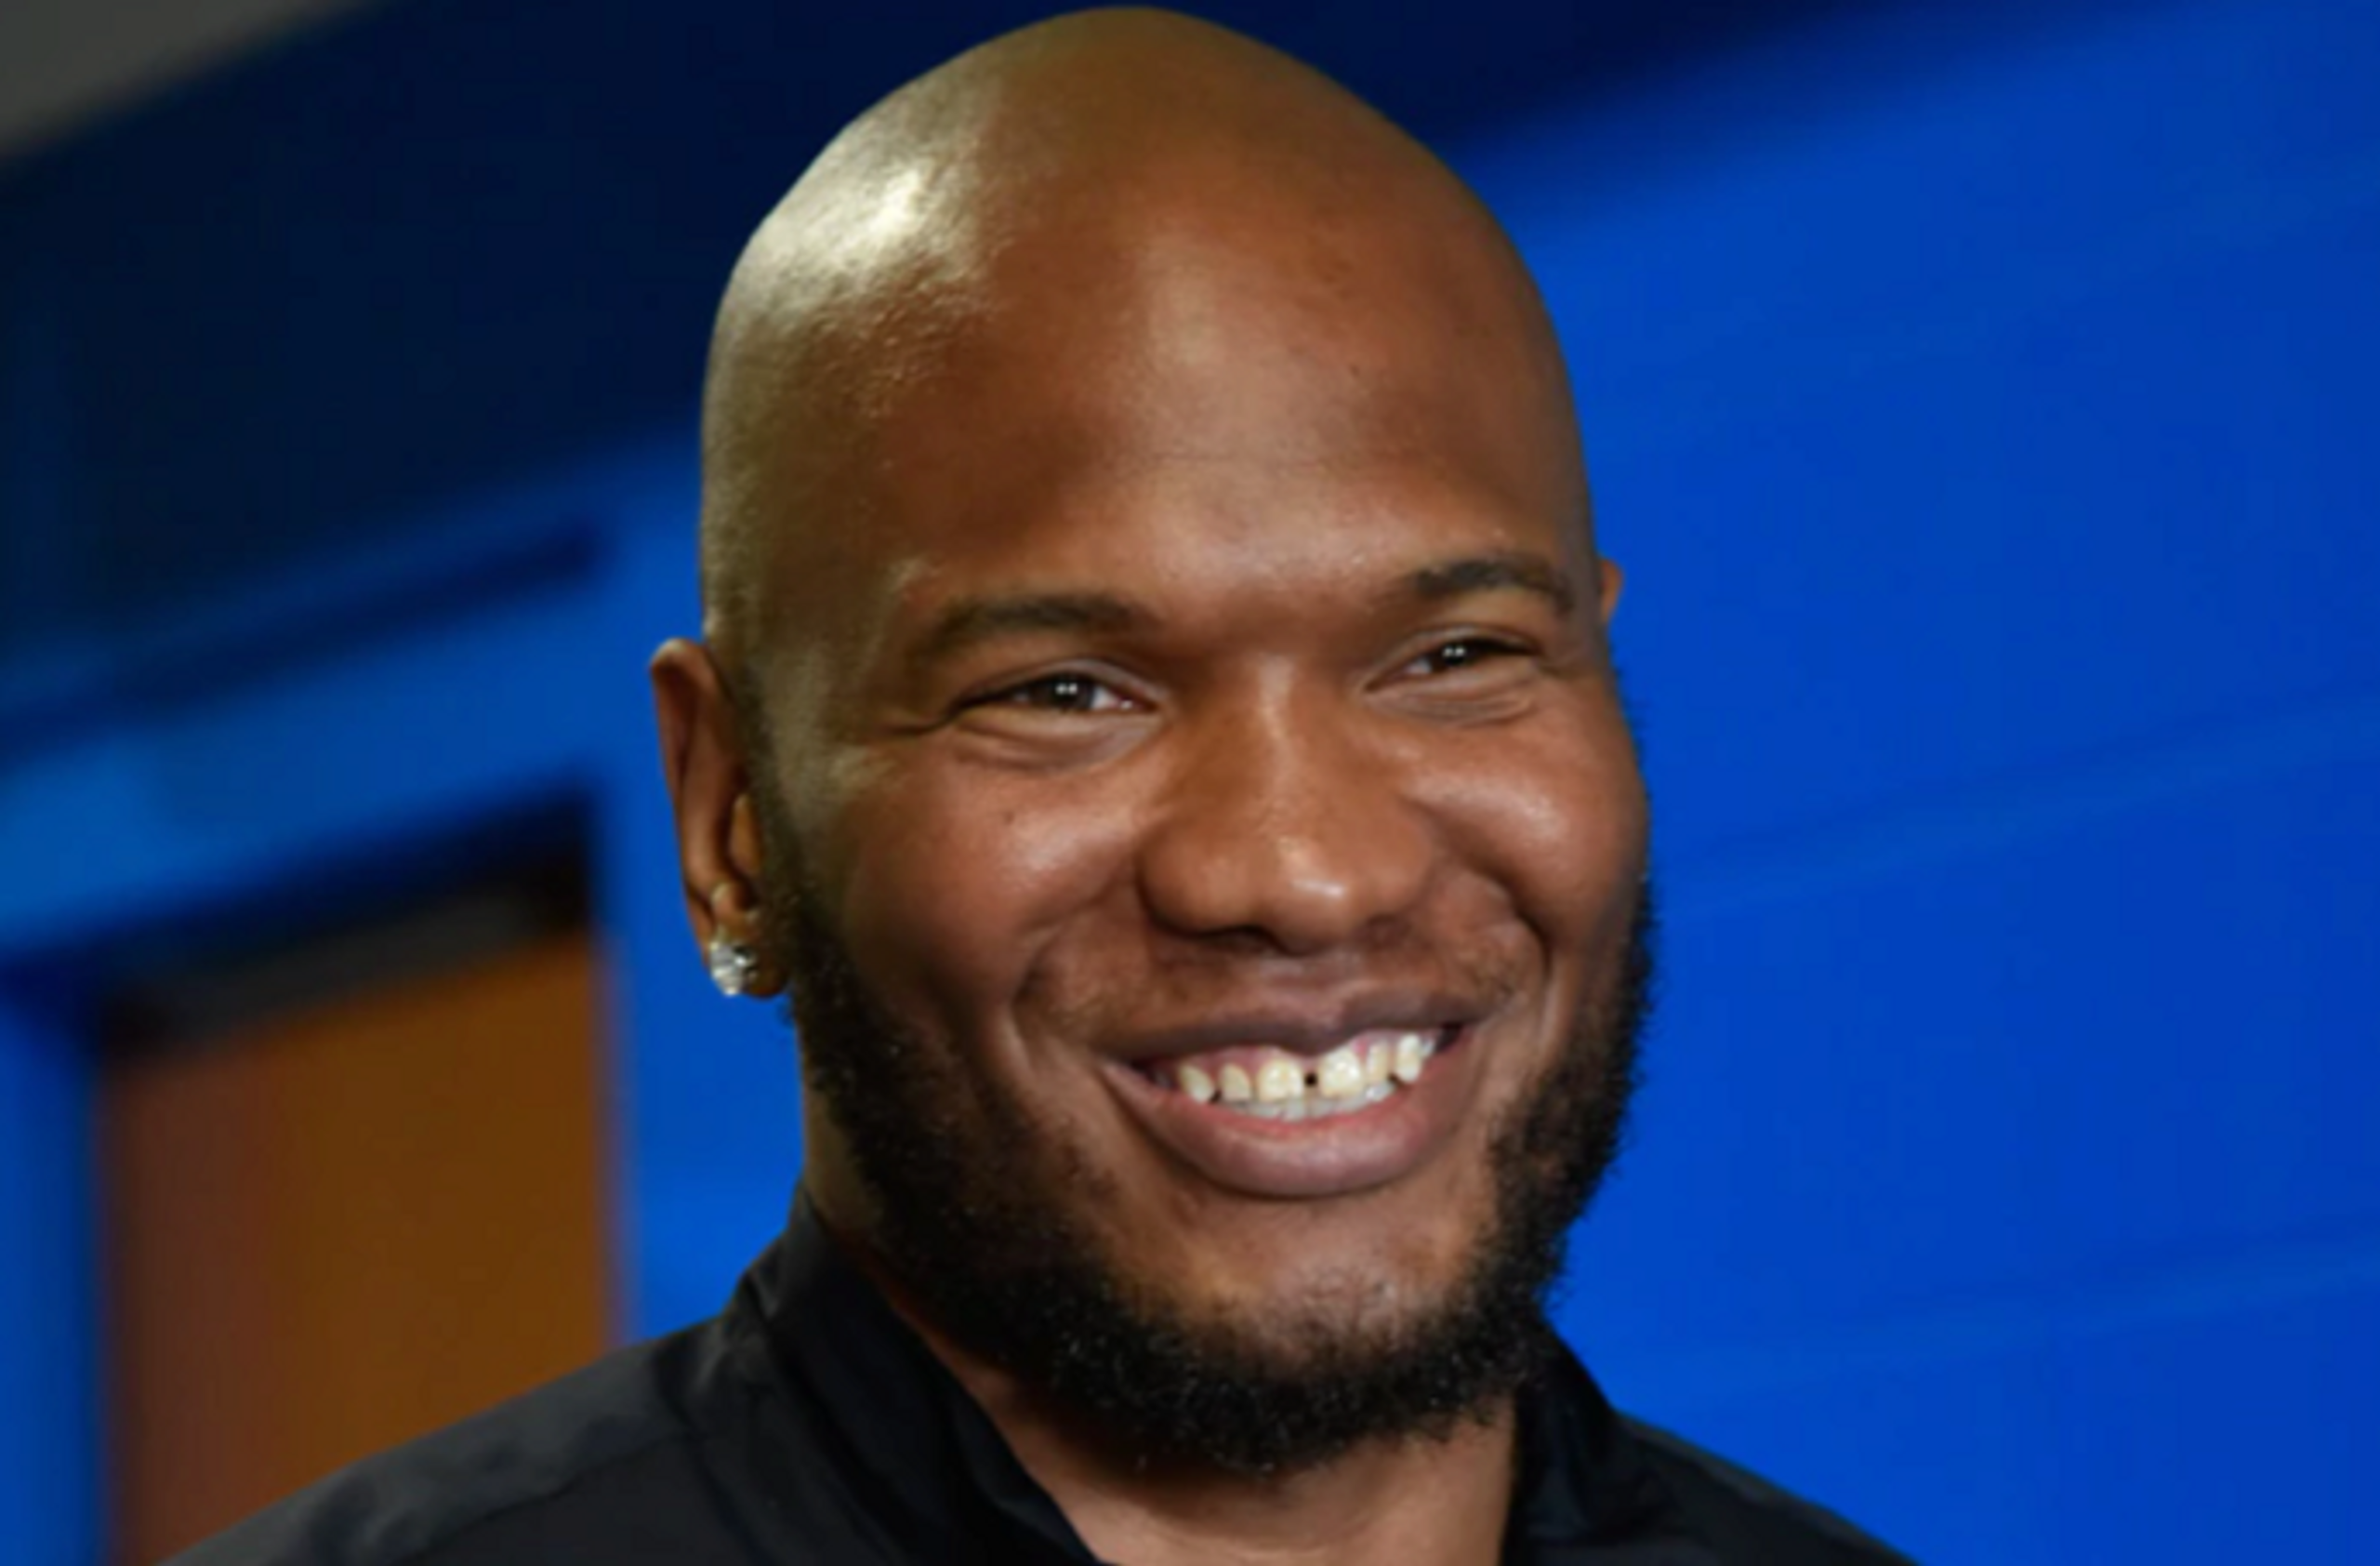 Mo Speights